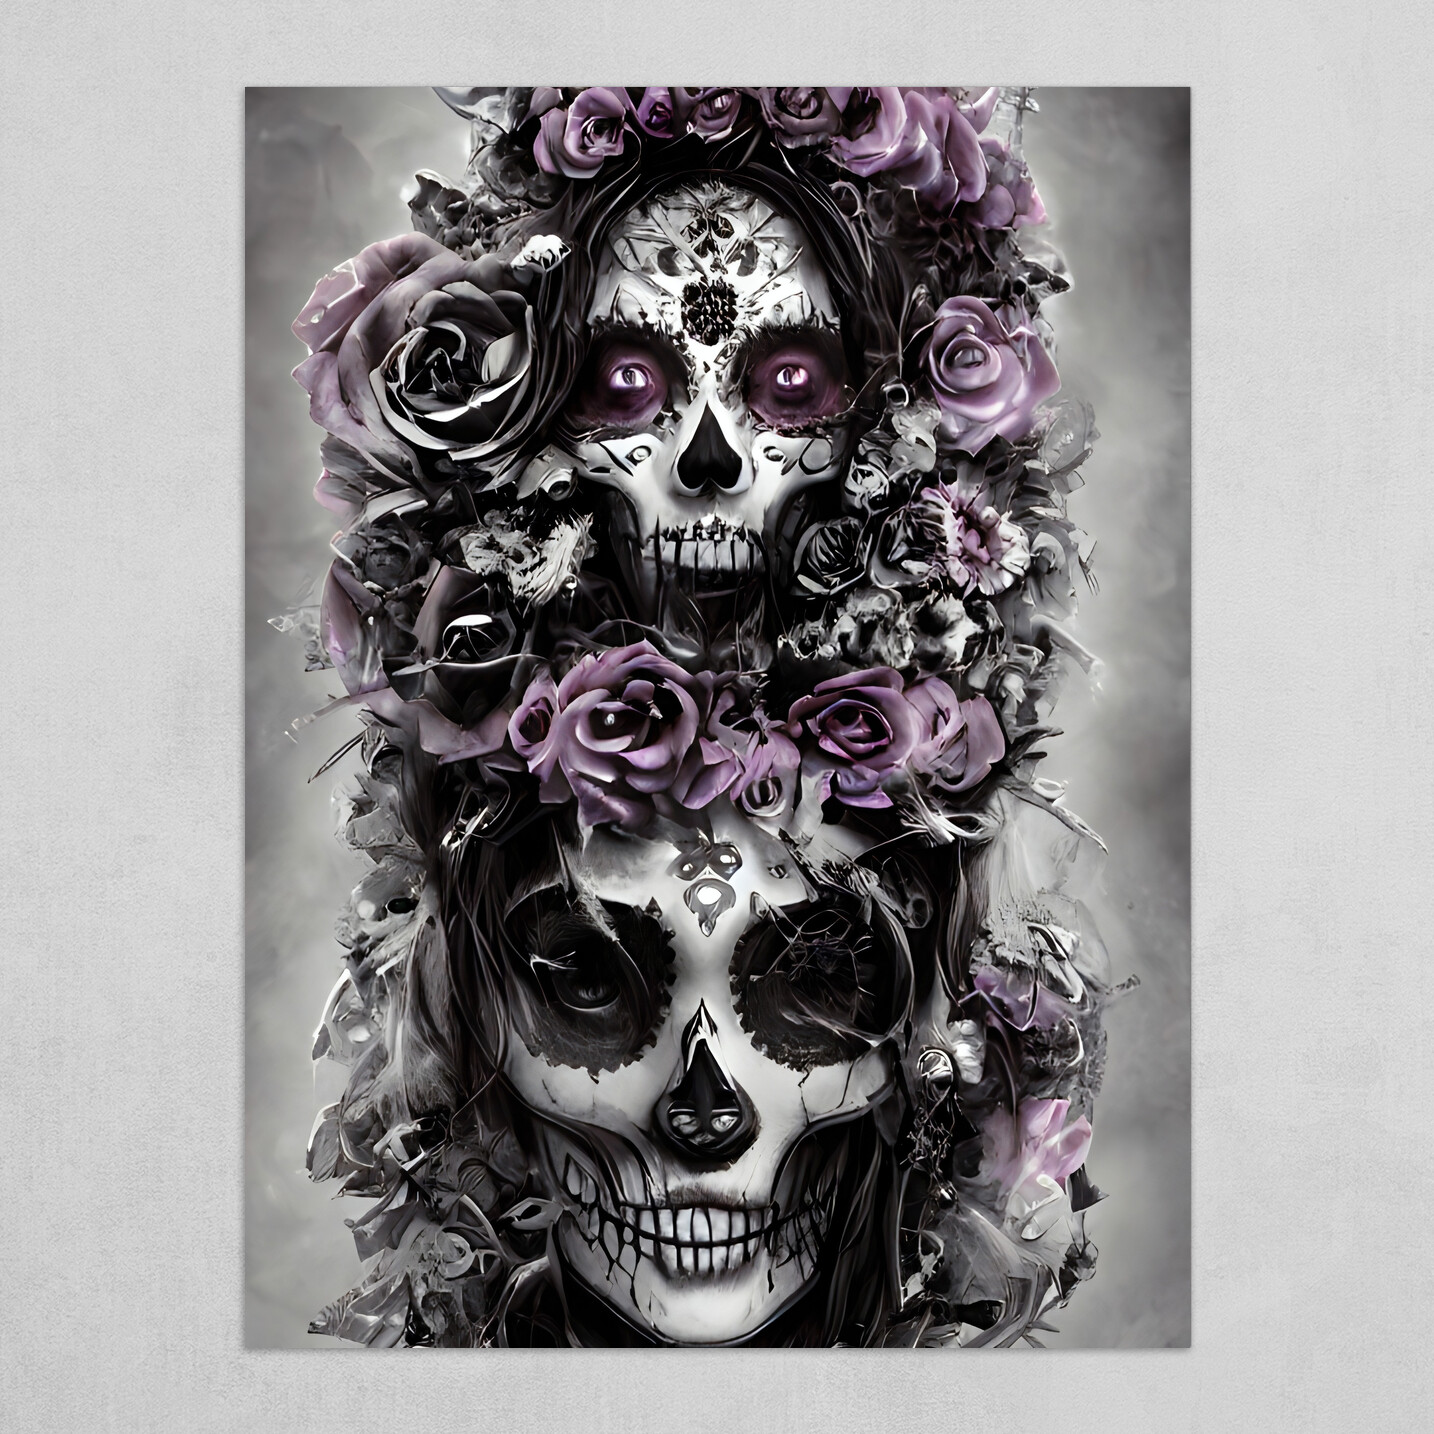 75 MindBlowing Day Of The Dead Tattoo Designs  AuthorityTattoo